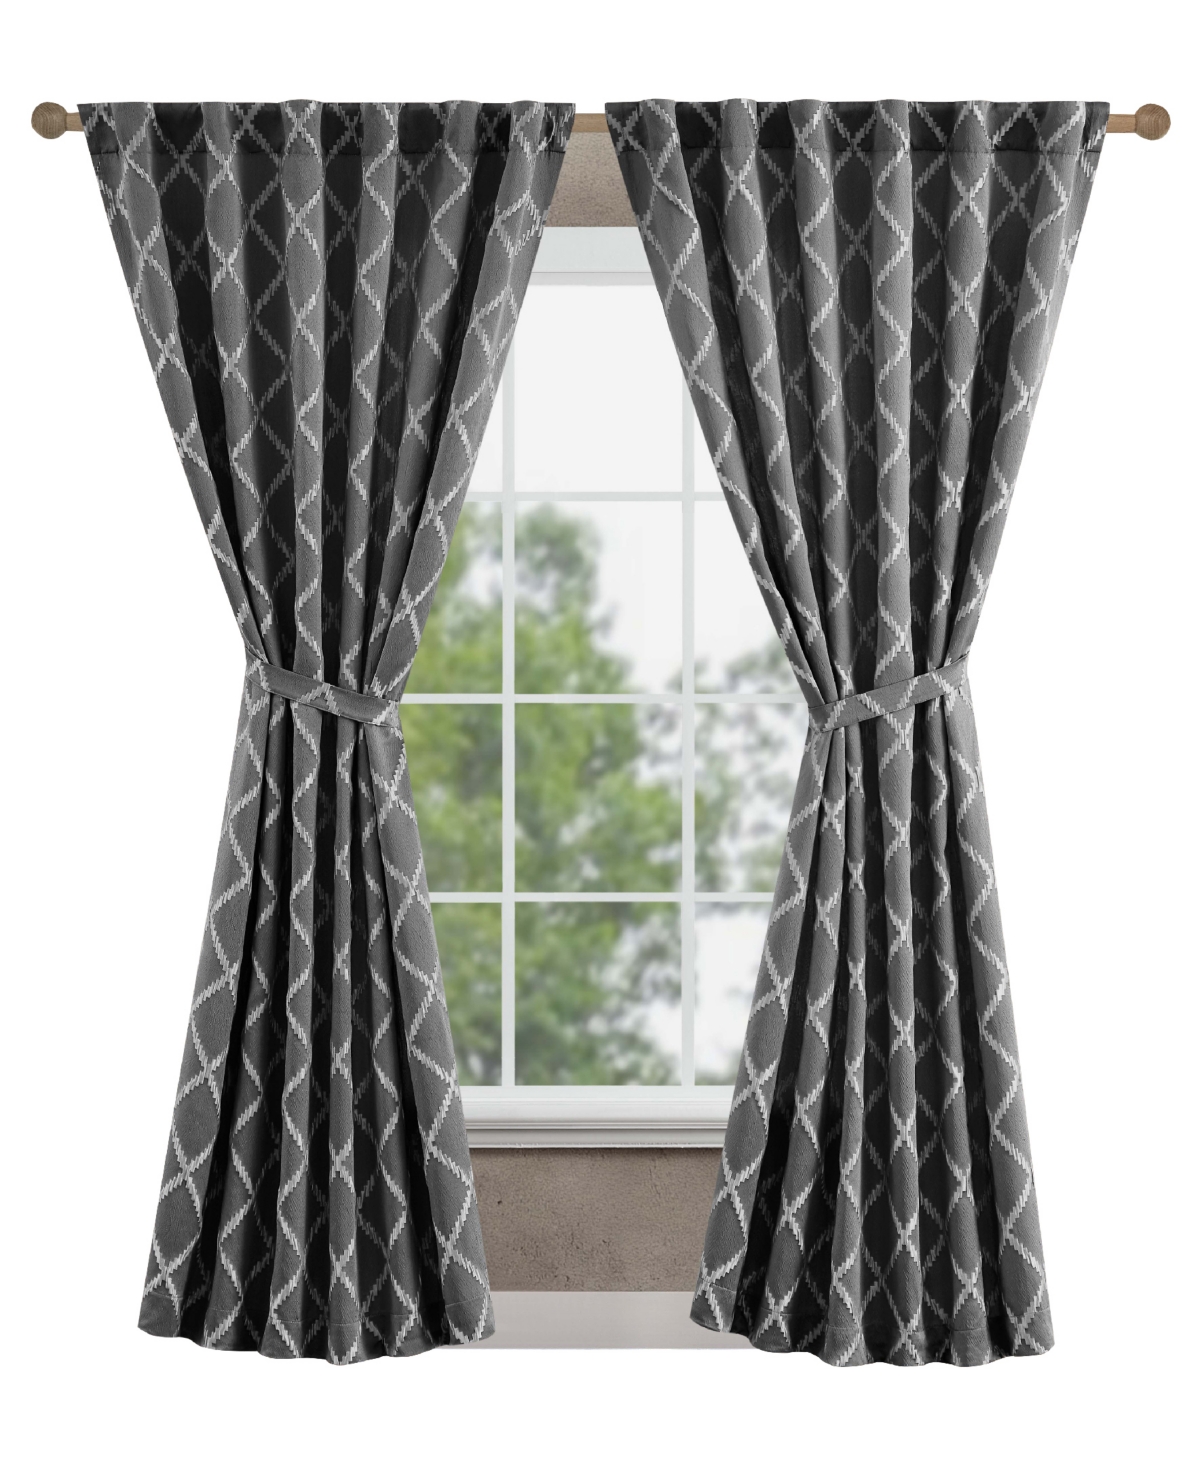 Jessica Simpson Lynee Textured Diamond Patterned Blackout Back-tab Window Curtain Panel Pair With Tiebacks, 52" X 84 In Gray